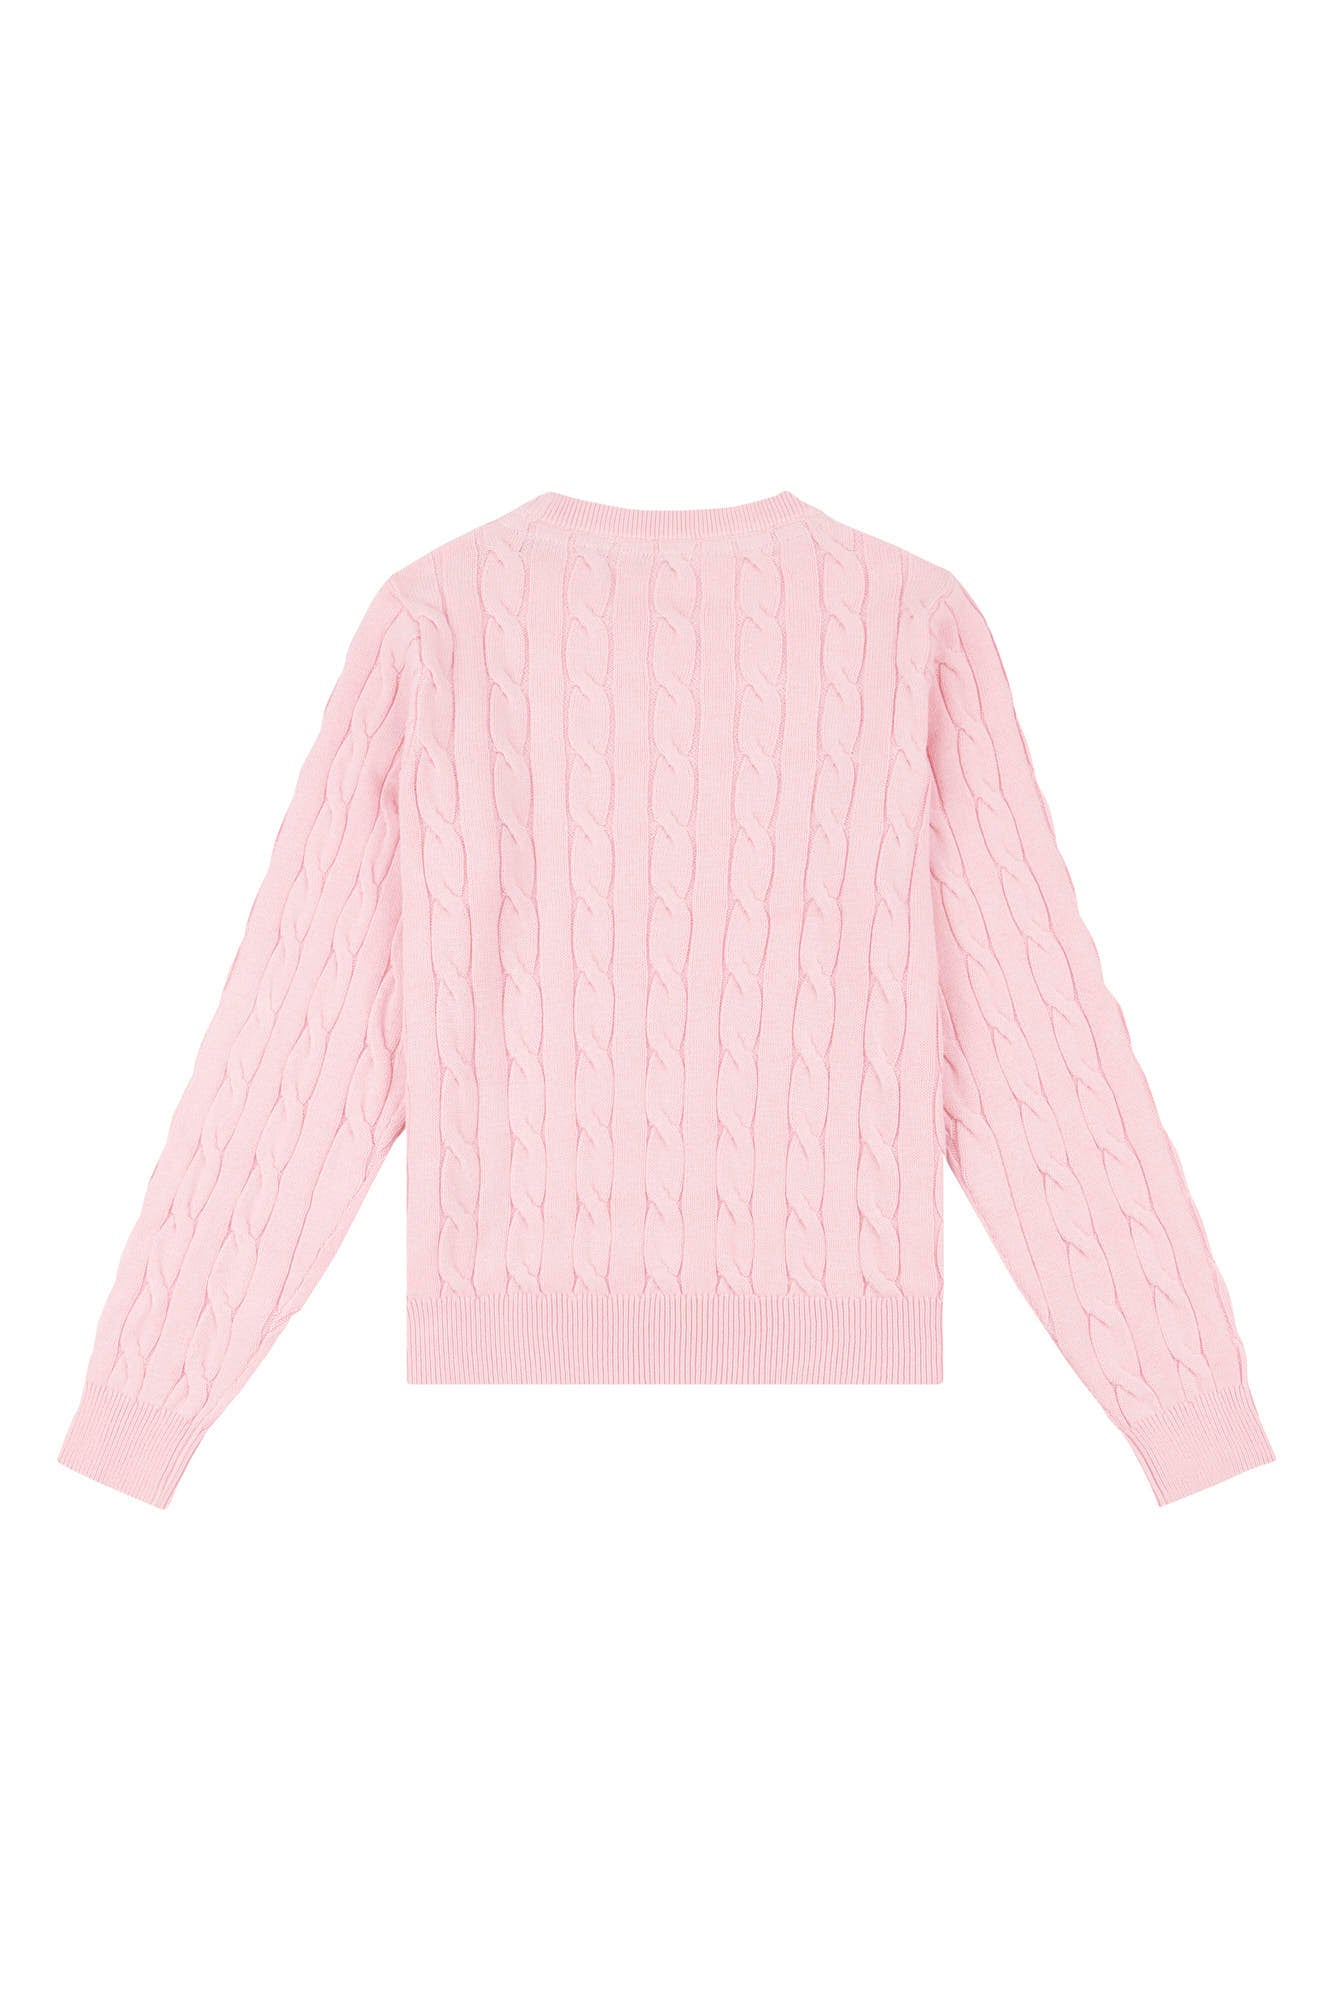 Girls Cable Knit Jumper in Romance Rose